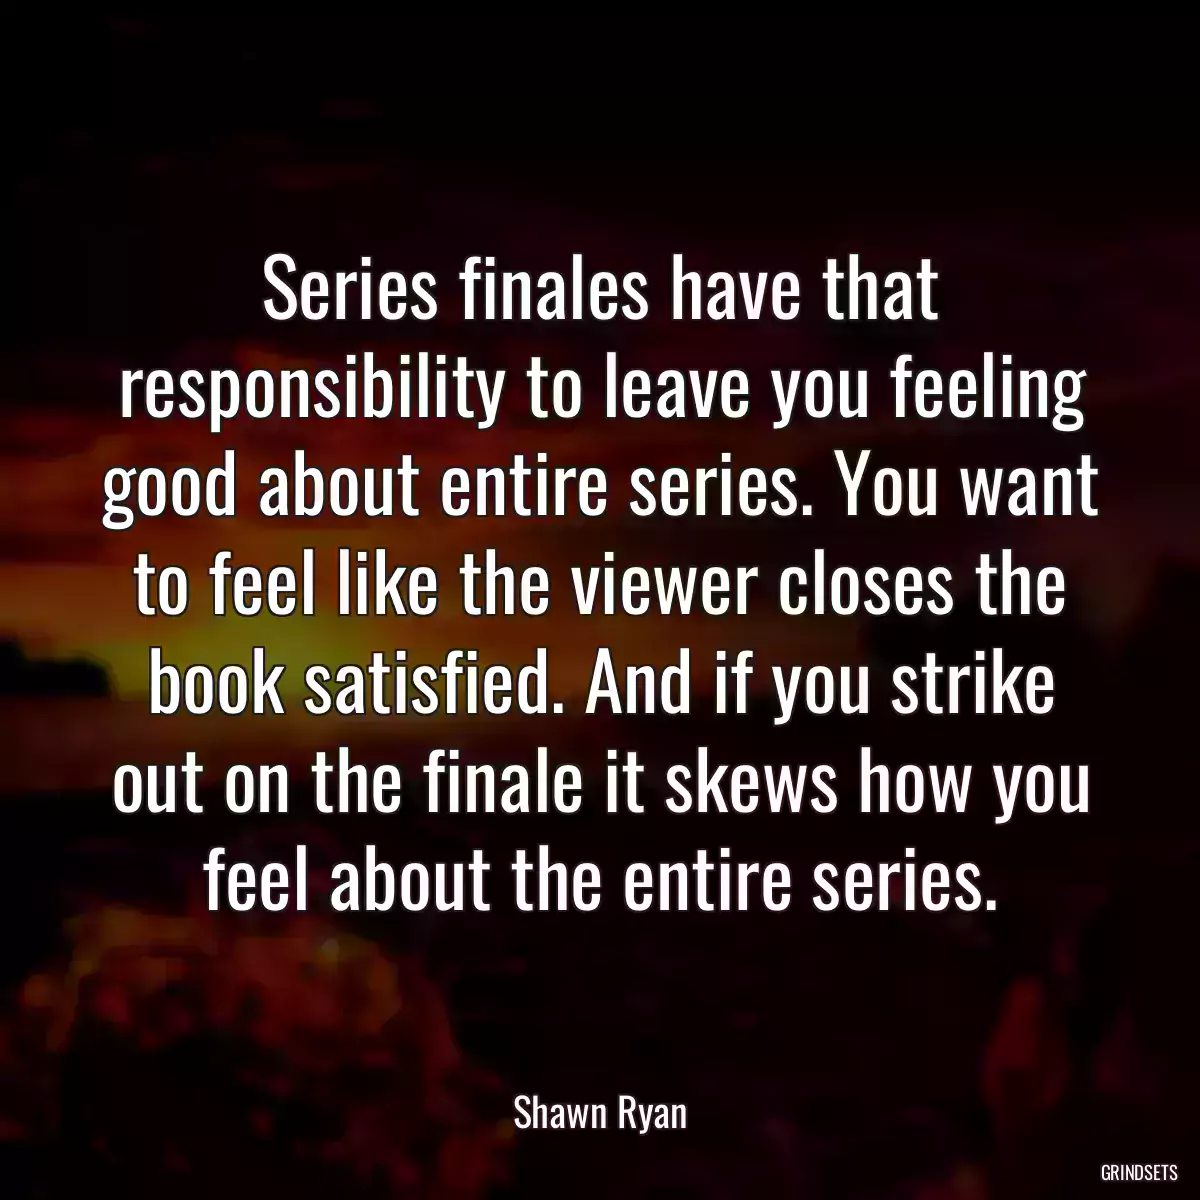 Series finales have that responsibility to leave you feeling good about entire series. You want to feel like the viewer closes the book satisfied. And if you strike out on the finale it skews how you feel about the entire series.